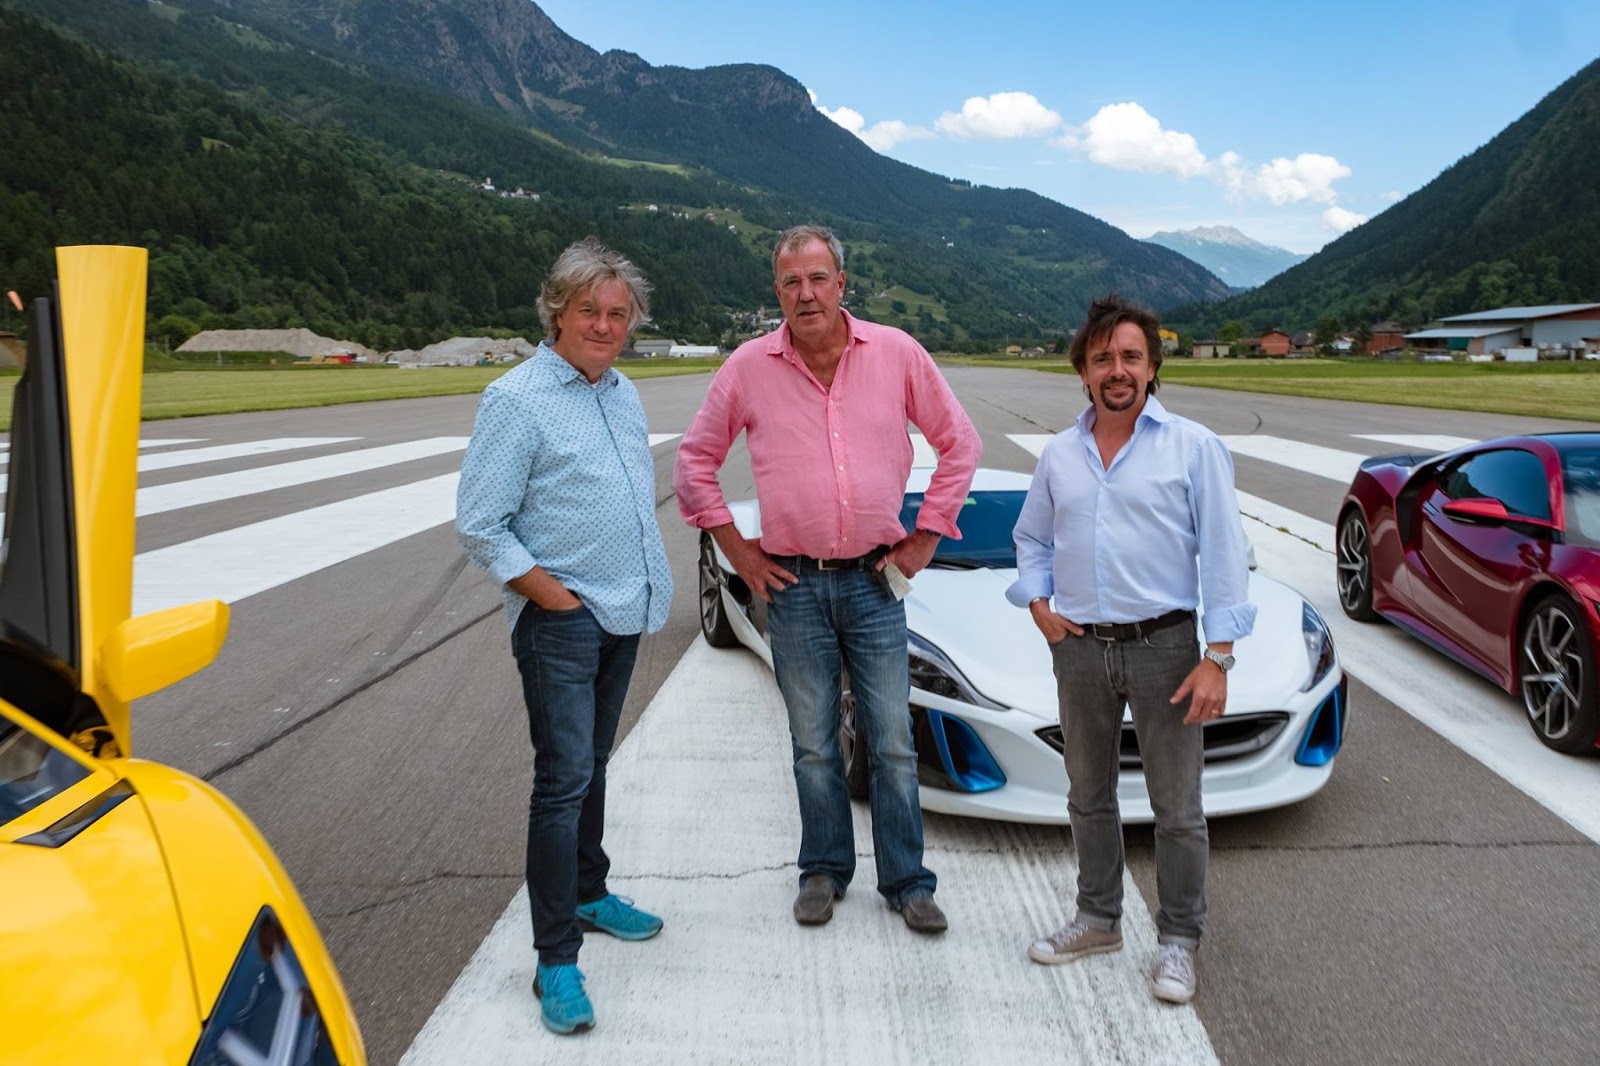 The Grand Tour's Opening Episode To Feature Hammond's Rimac Crash